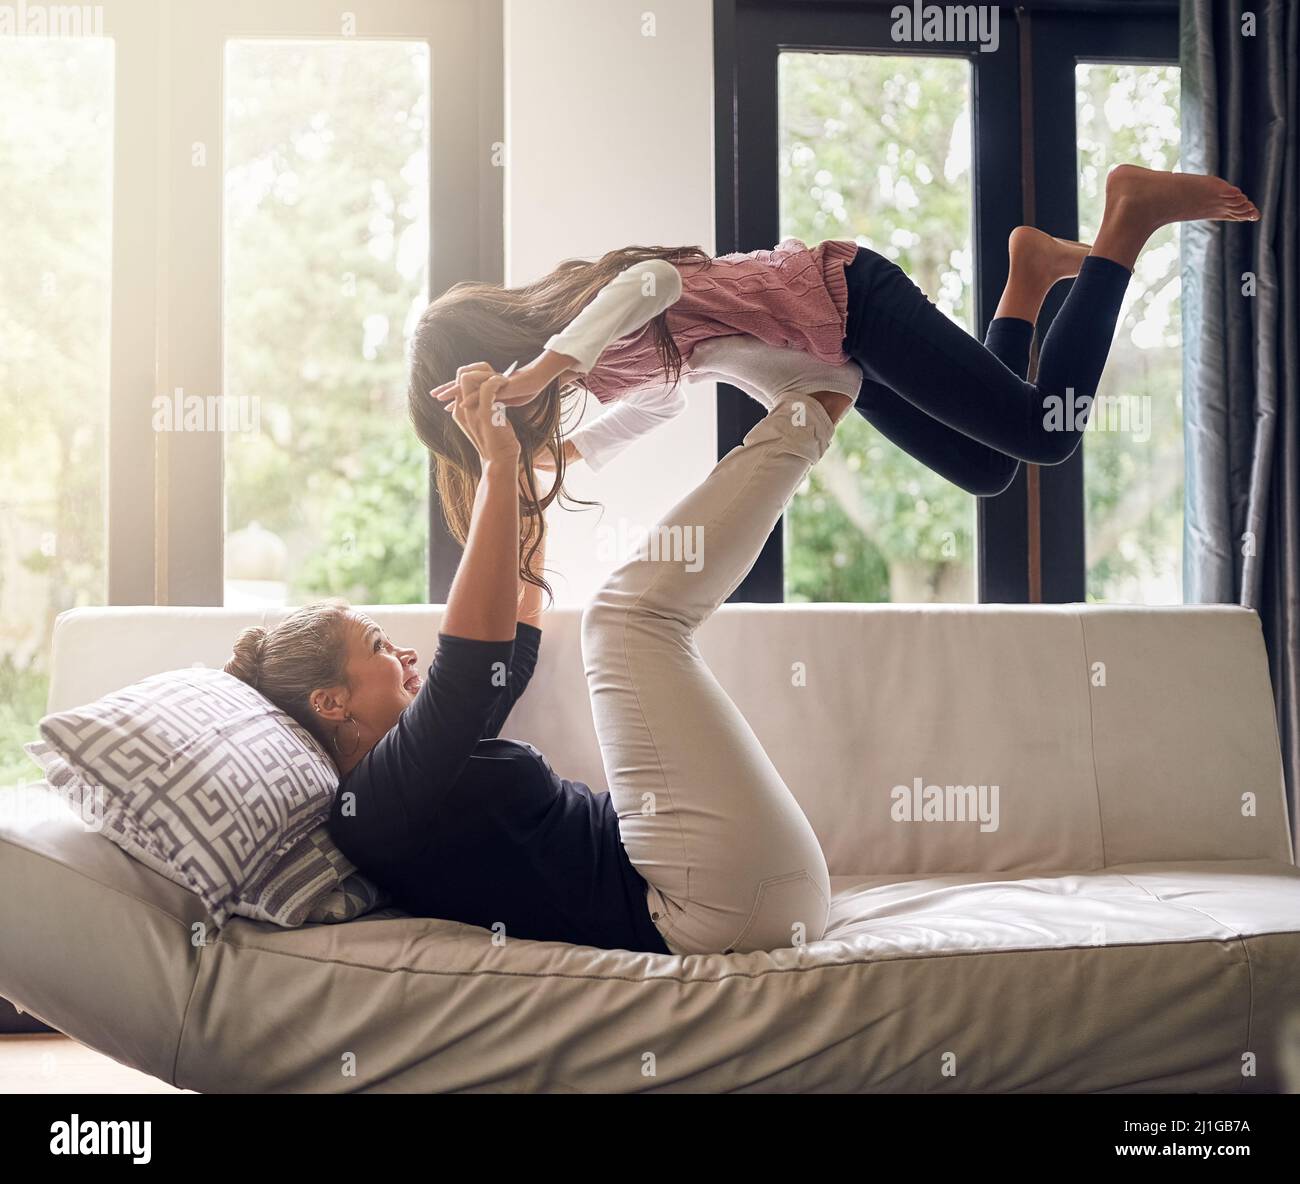 Hold on tight. Shot of a mother and daughter having fun at home. Stock Photo